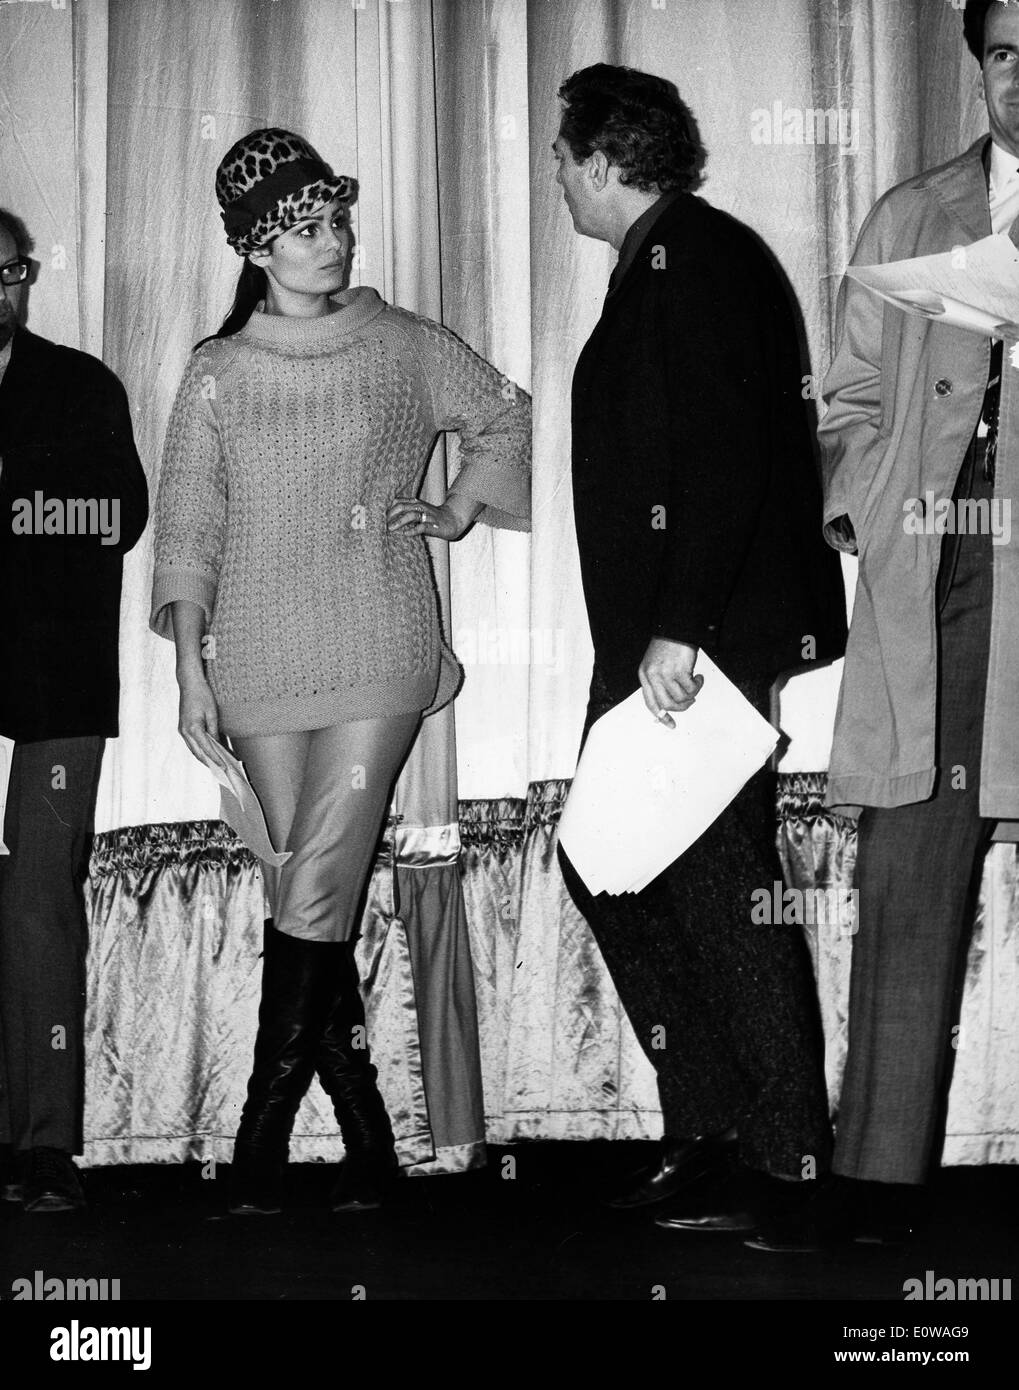 Actors Daliah Lavi and Peter Finch chat at rehearsal Stock Photo